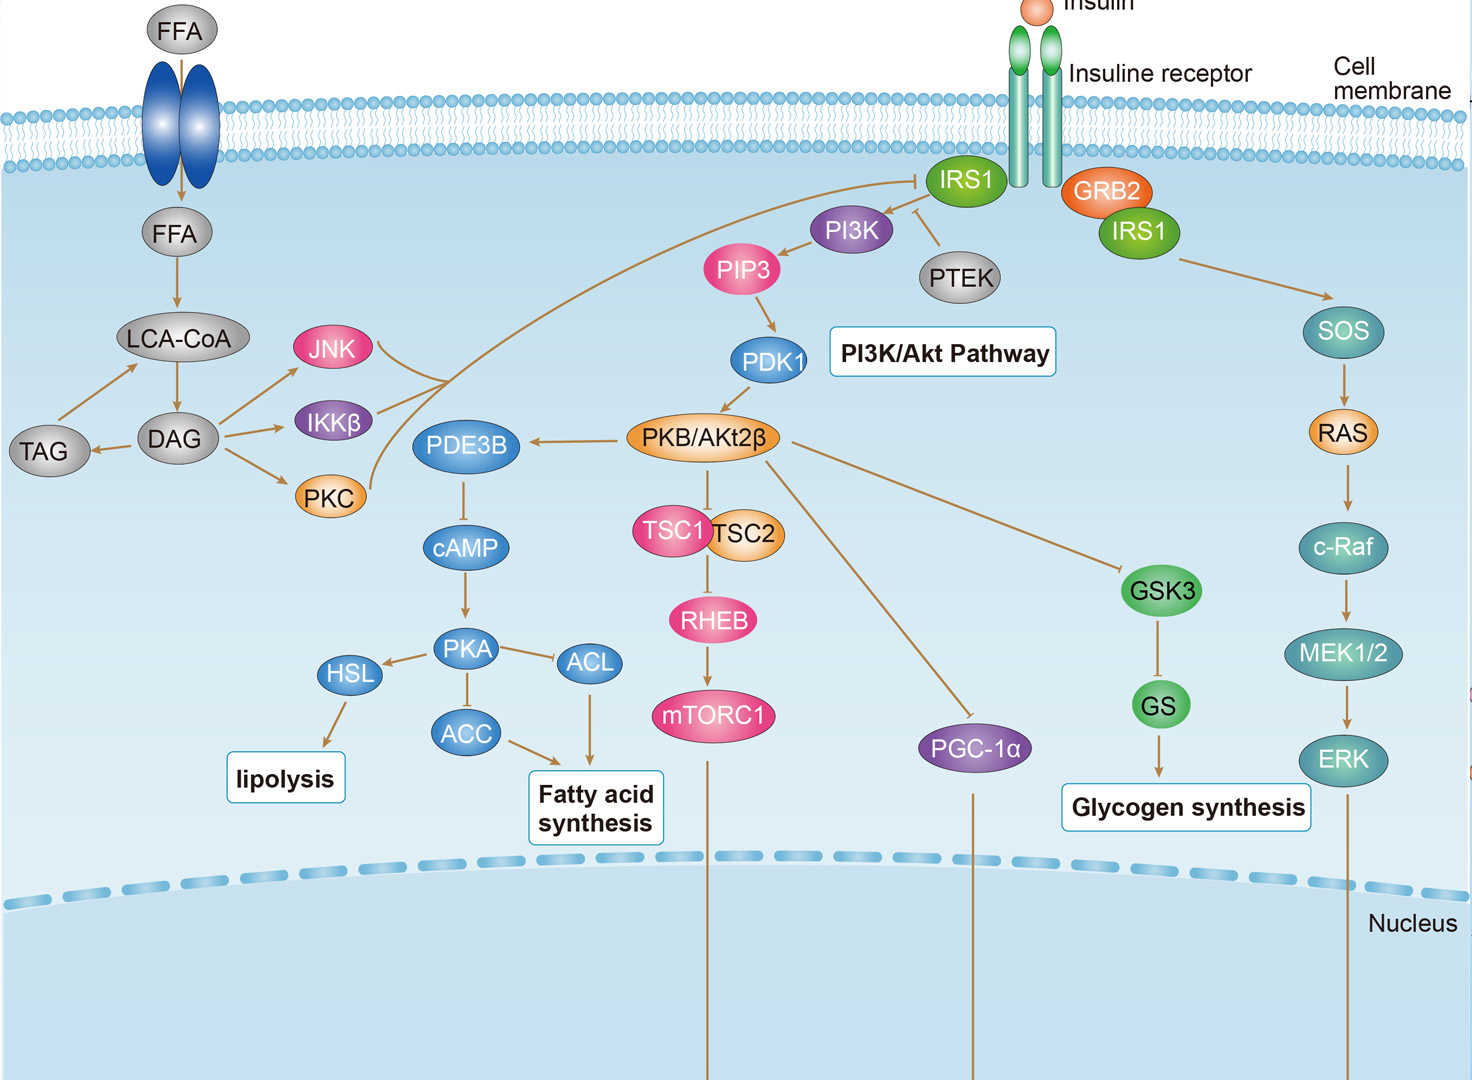 Insulin resistance Overview - Pathways, Diagnosis, Targeted Therapies